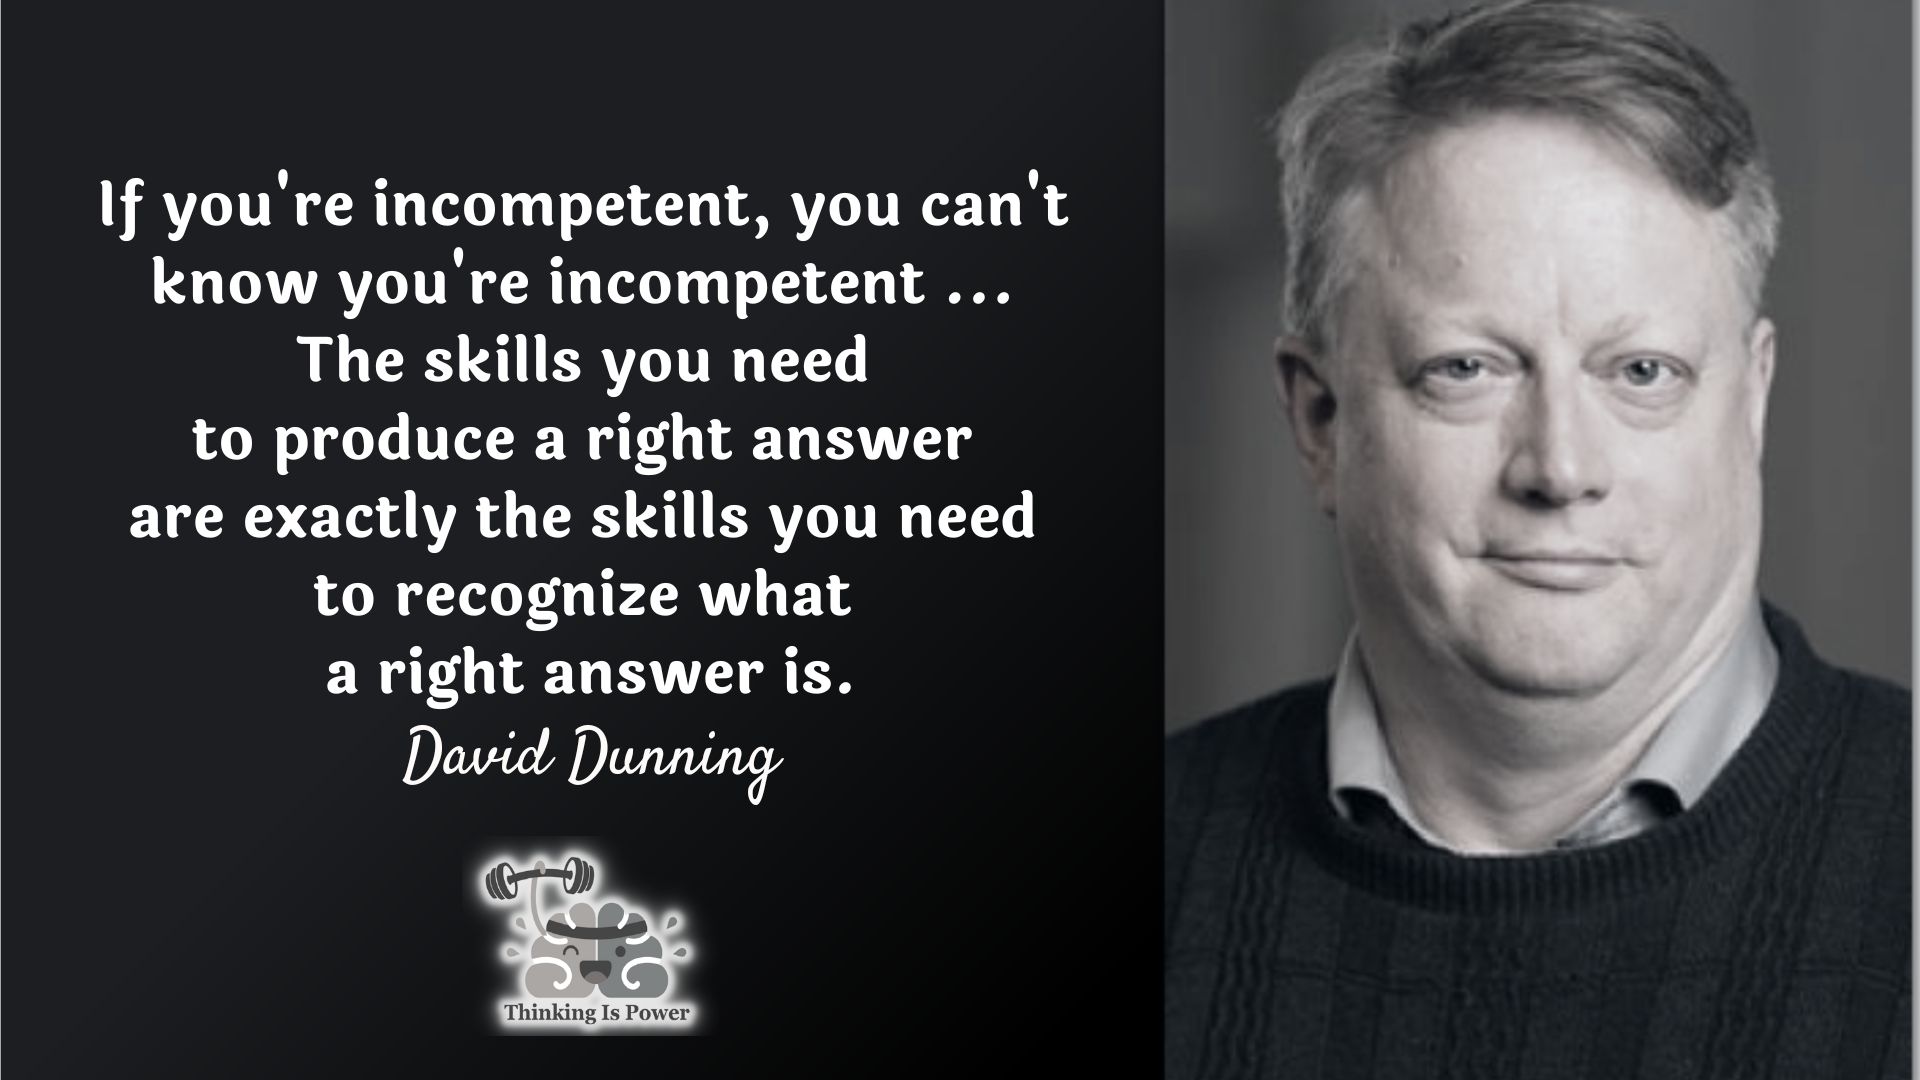 Dunning Kruger Quote: If you’re incompetent, you can’t know you’re incompetent…the skills you need to produce a right answer are exactly the skills you need to recognize what a right answer is.